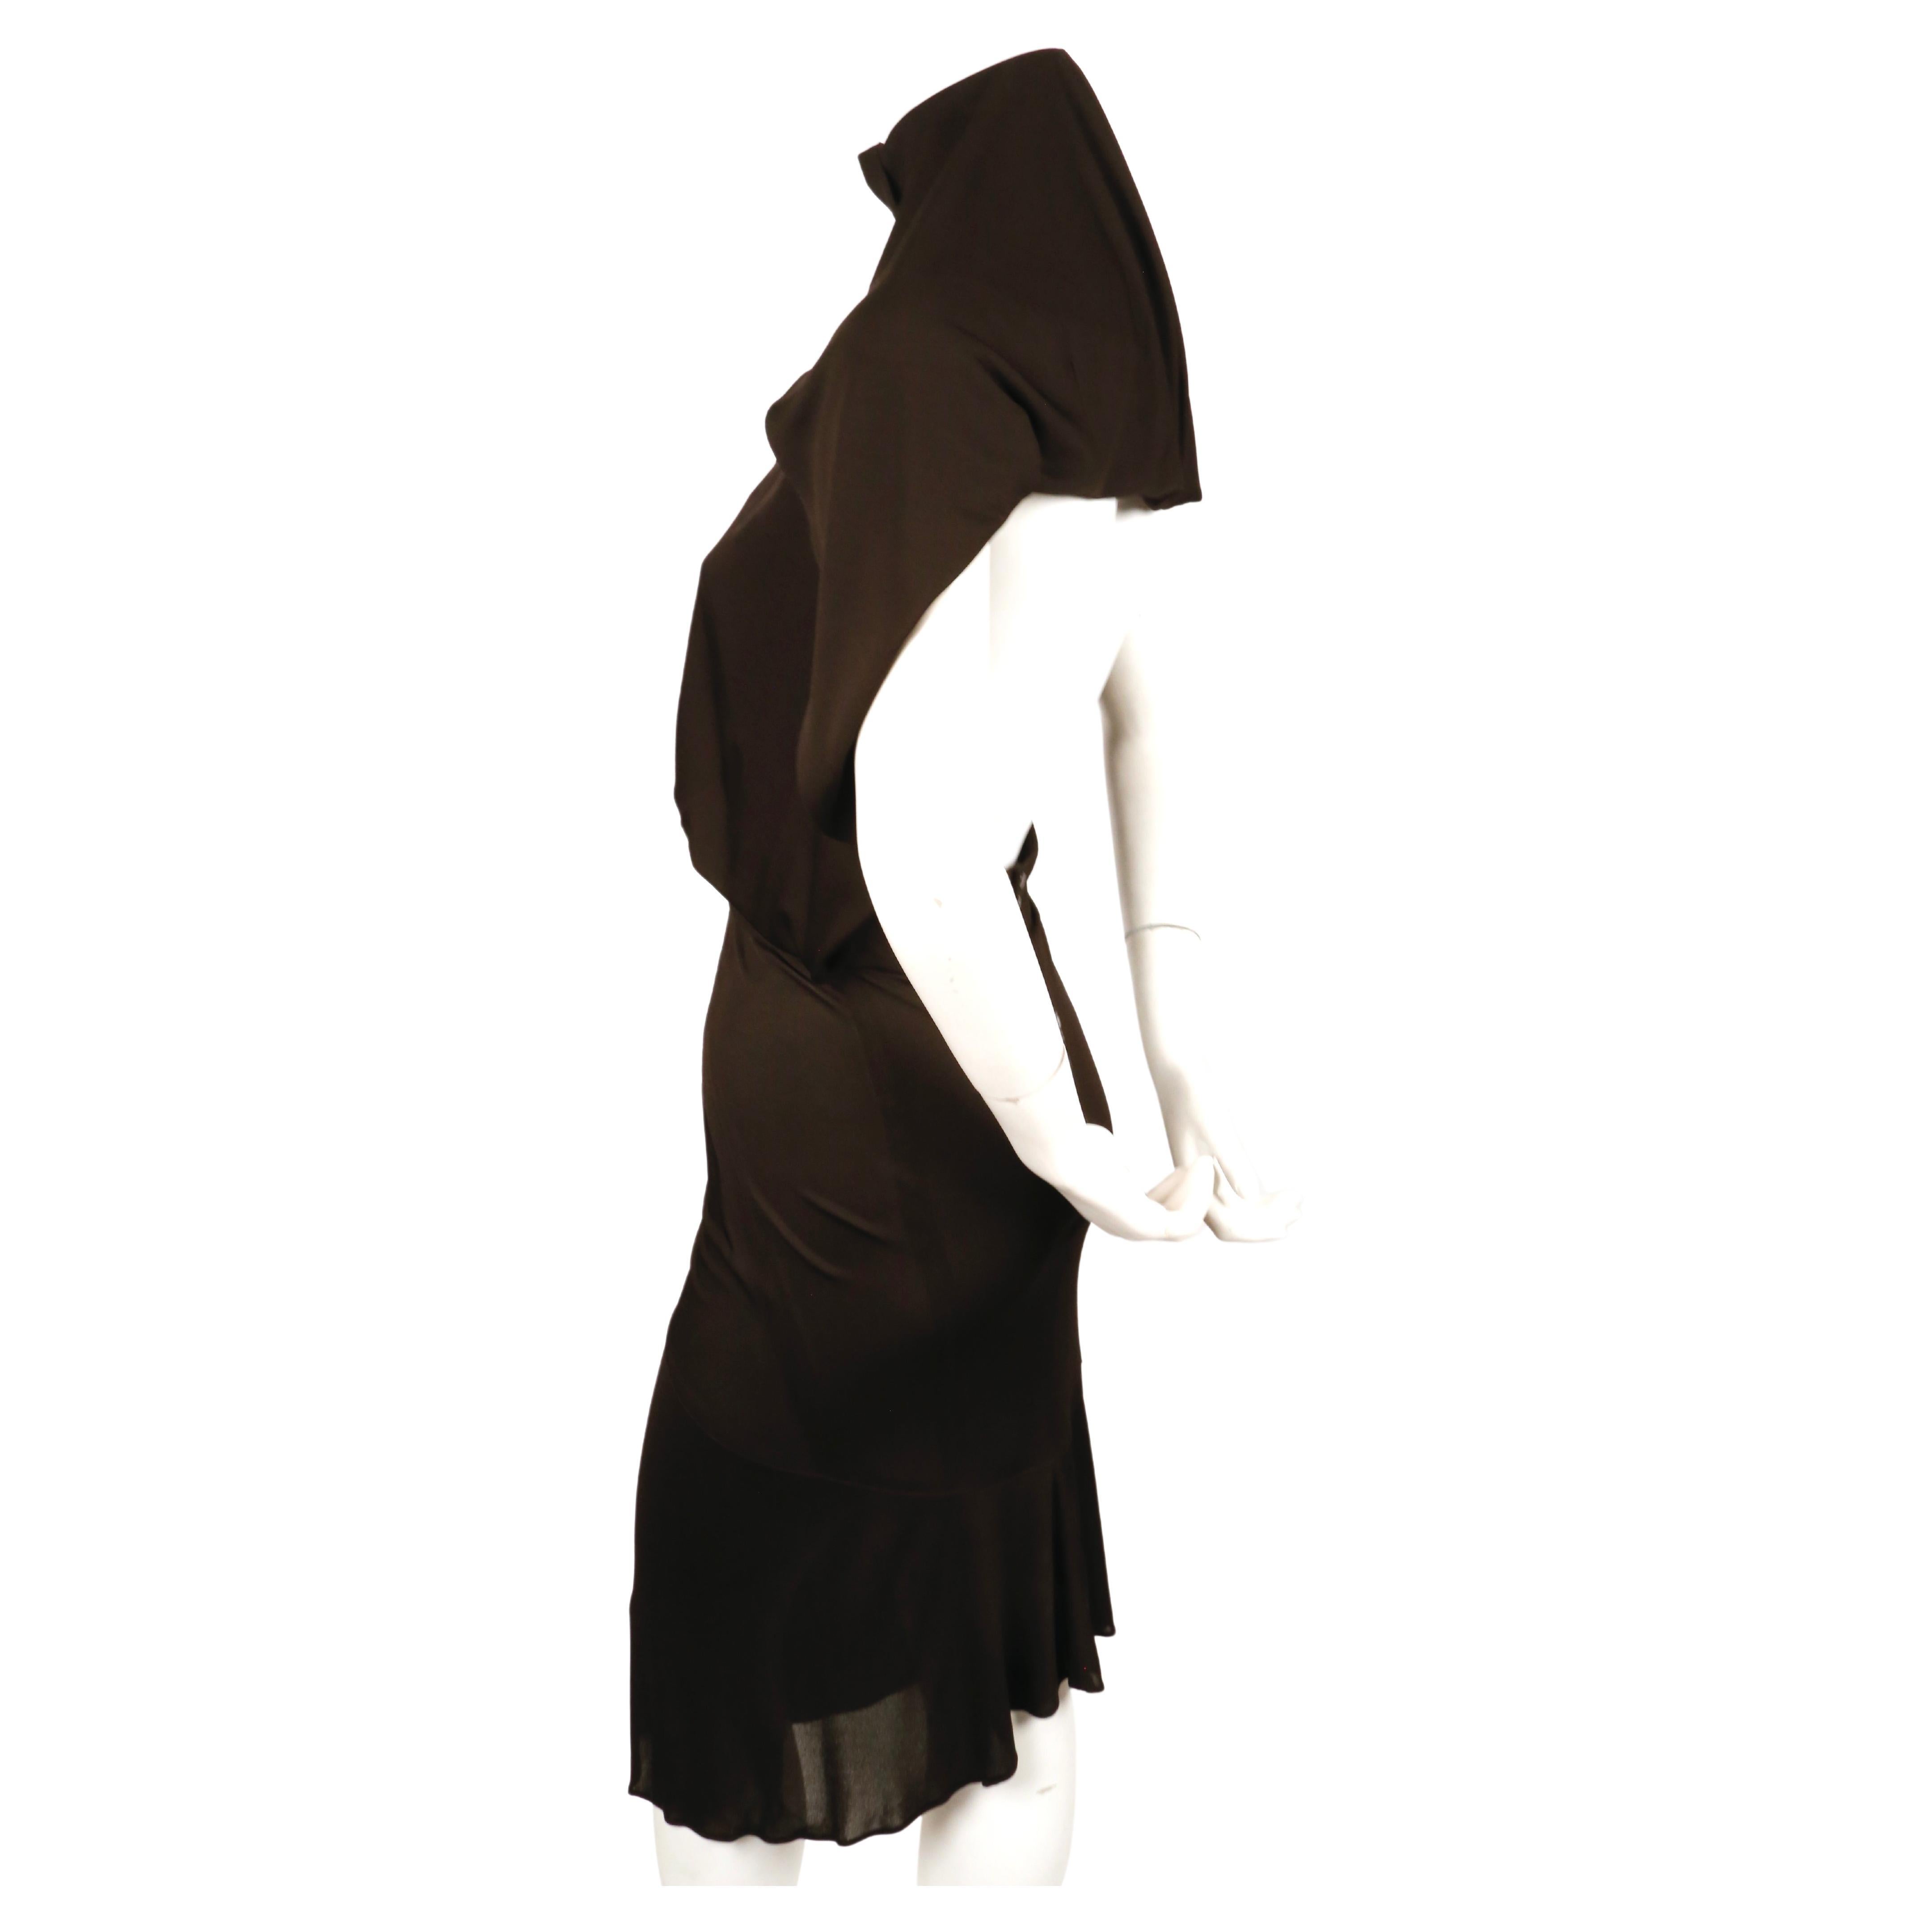 very rare 1984 AZZEDINE ALAIA iconic hooded jersey dress For Sale 7